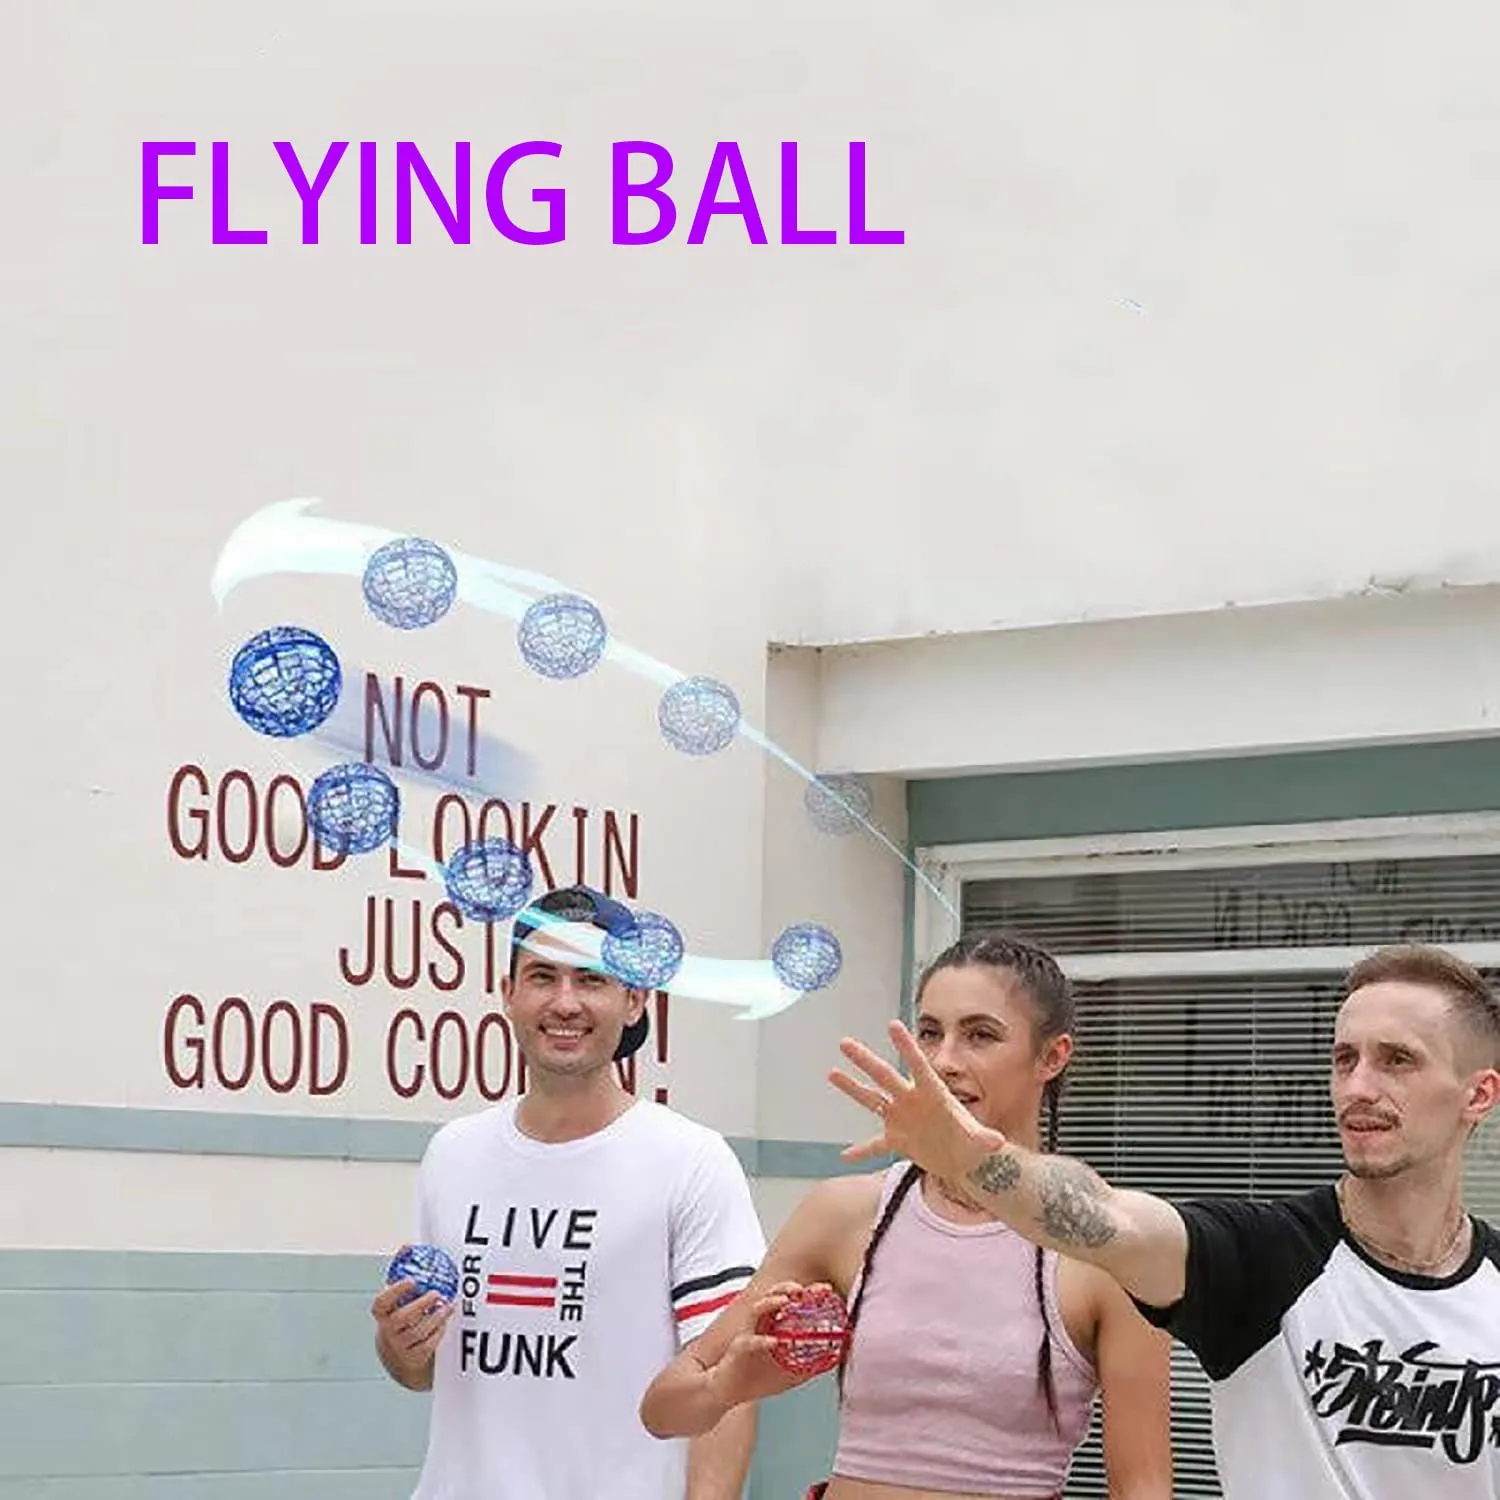 flying ball toys globe shape mini drone flying orb ball rgb lights spinner 360° rotating hover ball cool toy for kids adult magic flying toys outdoor indoor purple 